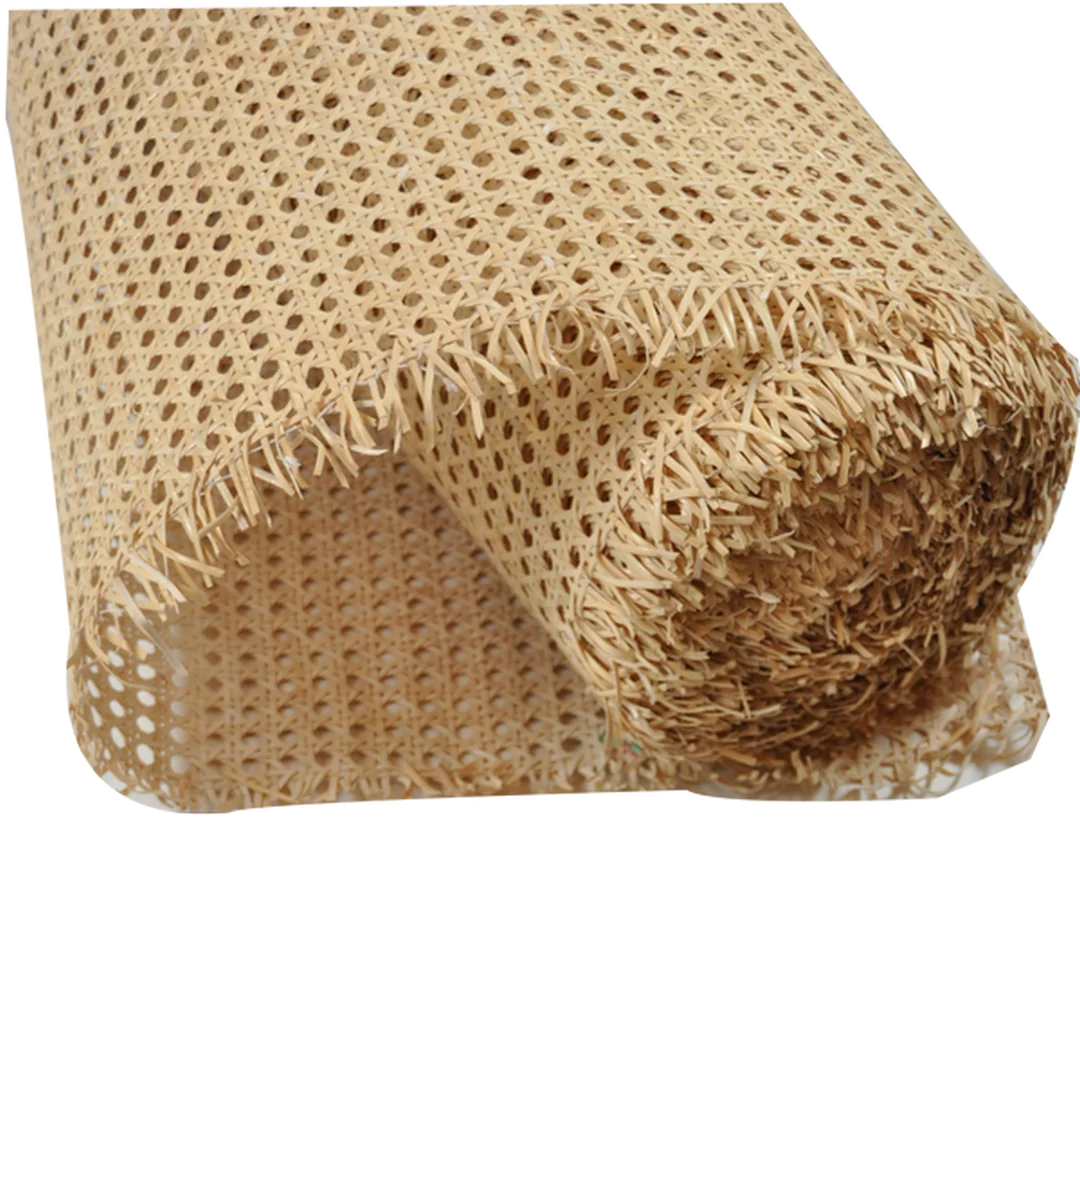 Wholesale Rattan Webbing Cane / Bleached and Non-bleached / Made In Vietnam